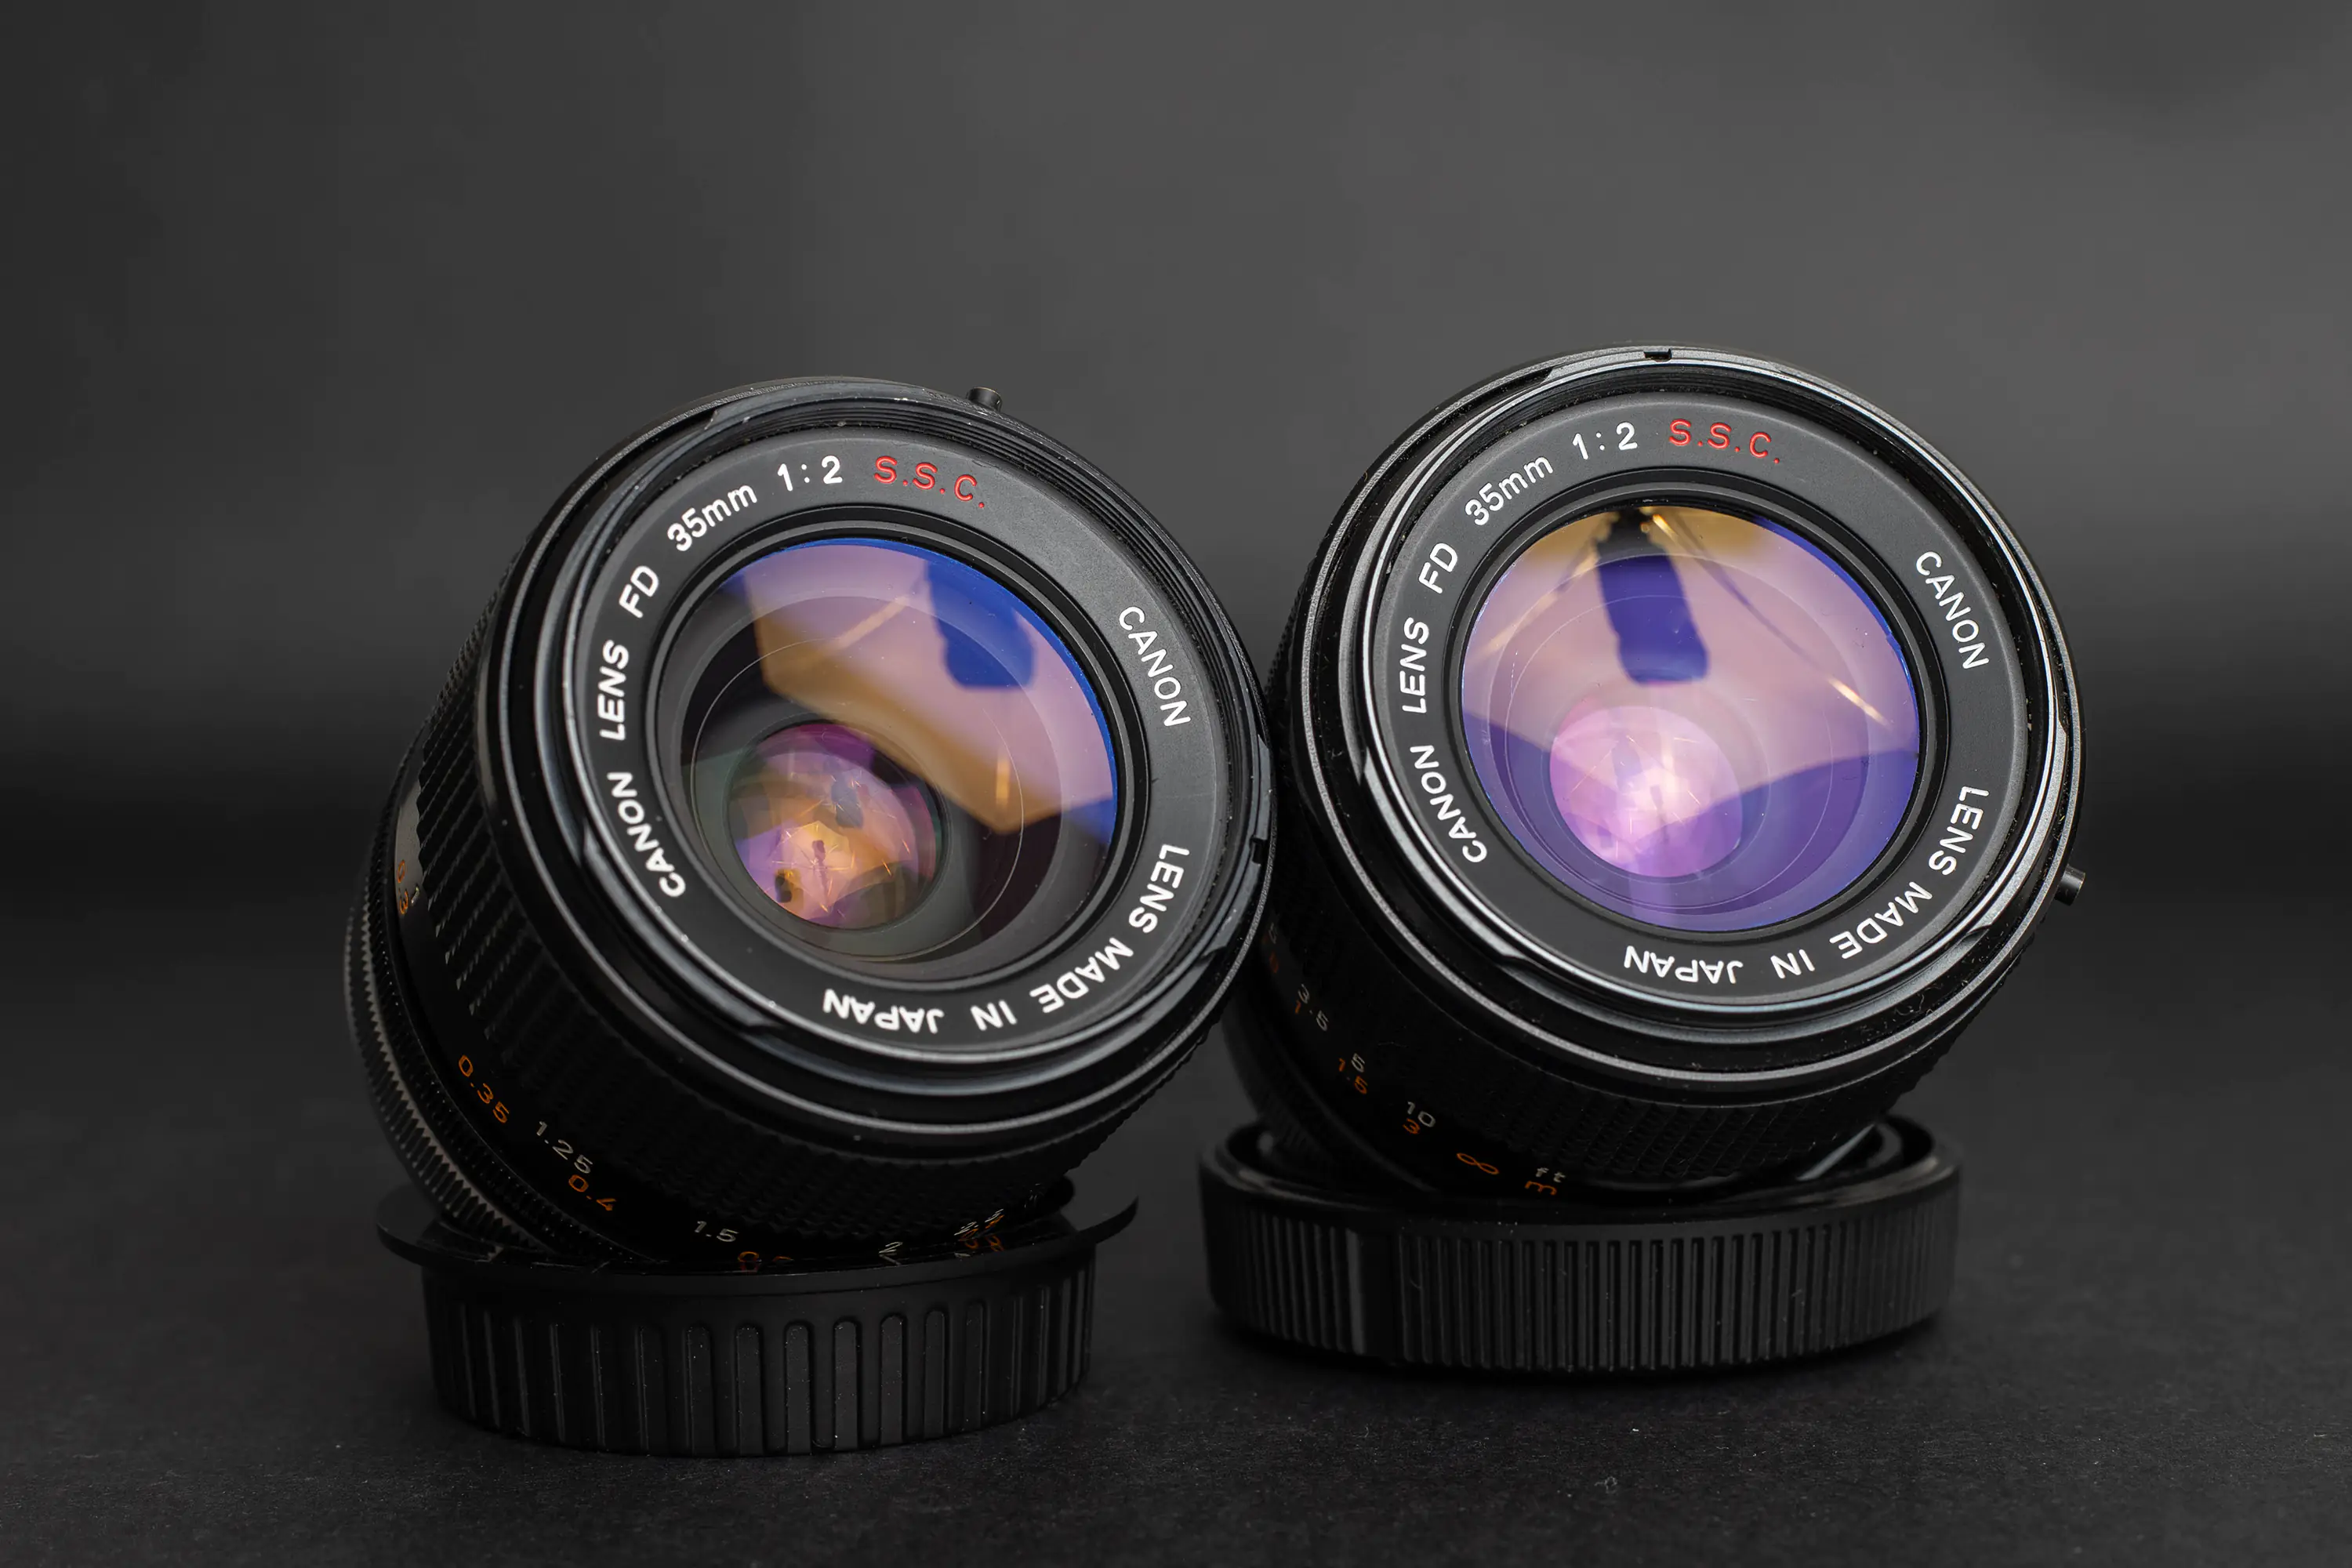 Two Canon FD 35mm f2 concave lenses of the first S.S.C. version.